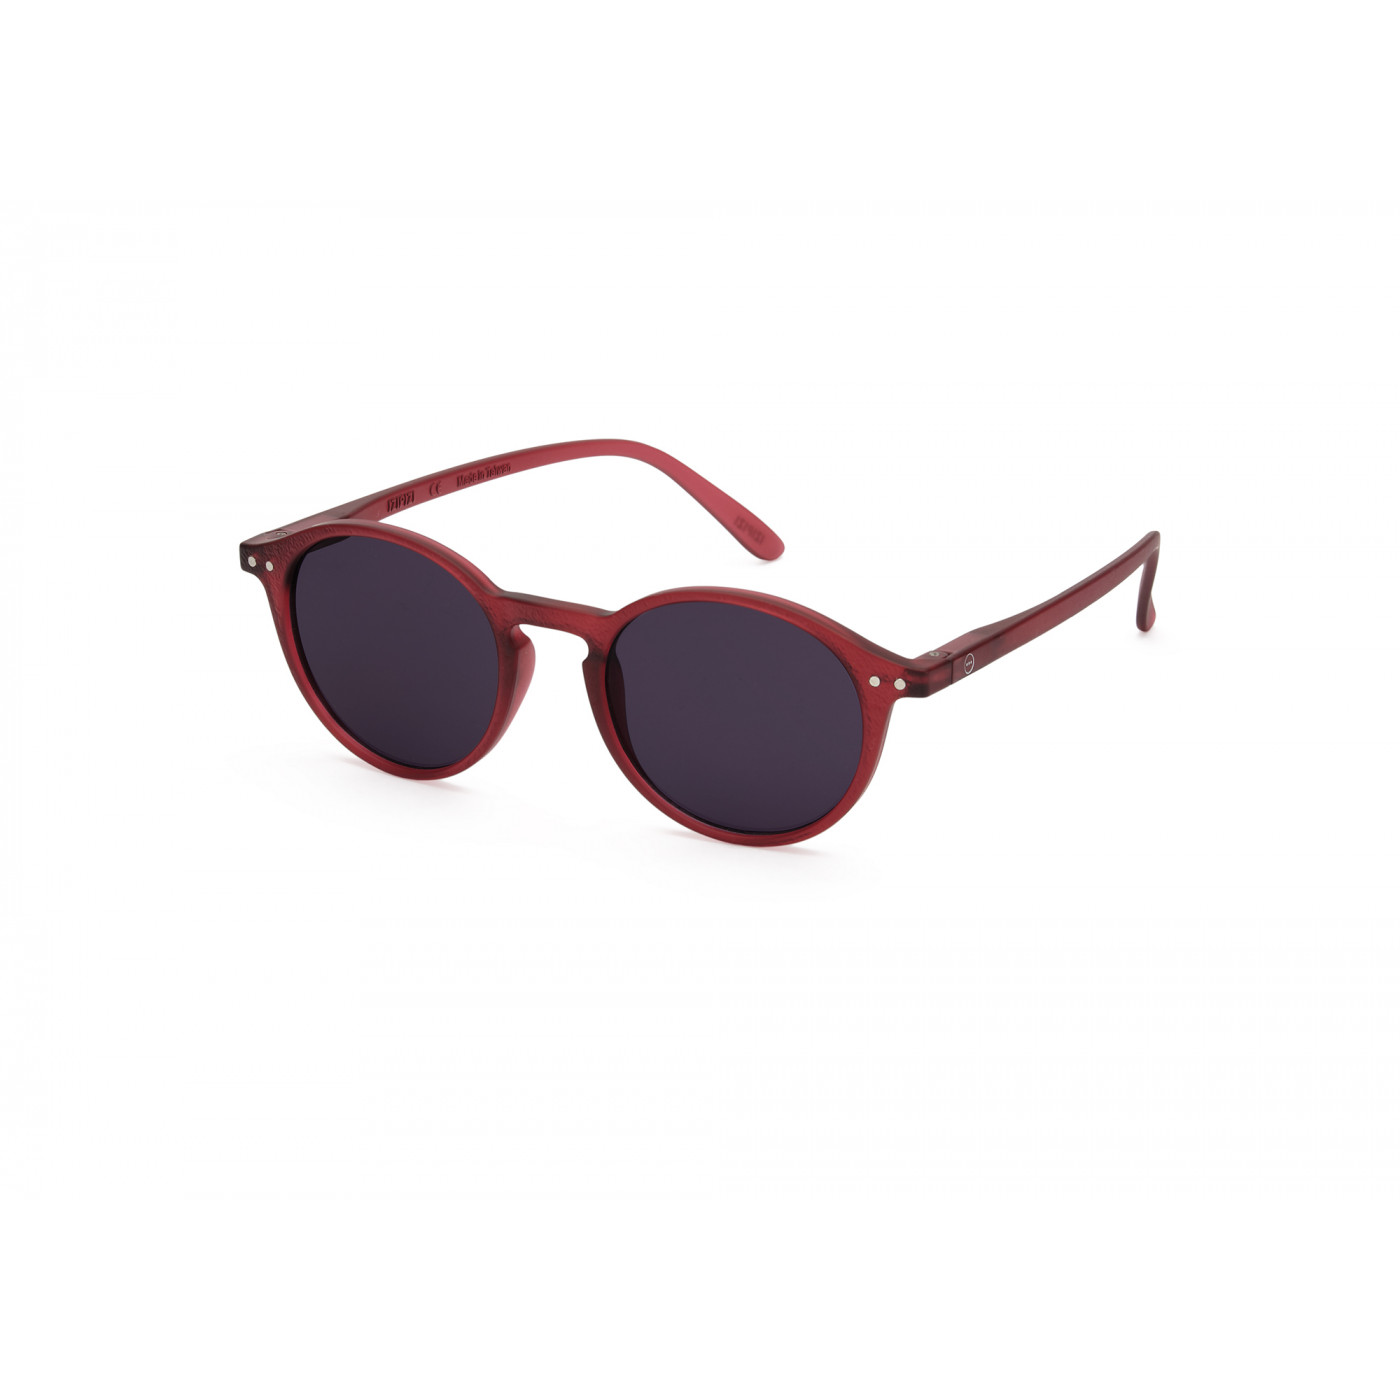 Sunglasses frame D Rosy Red by Izipizi Essentia collection for AW22